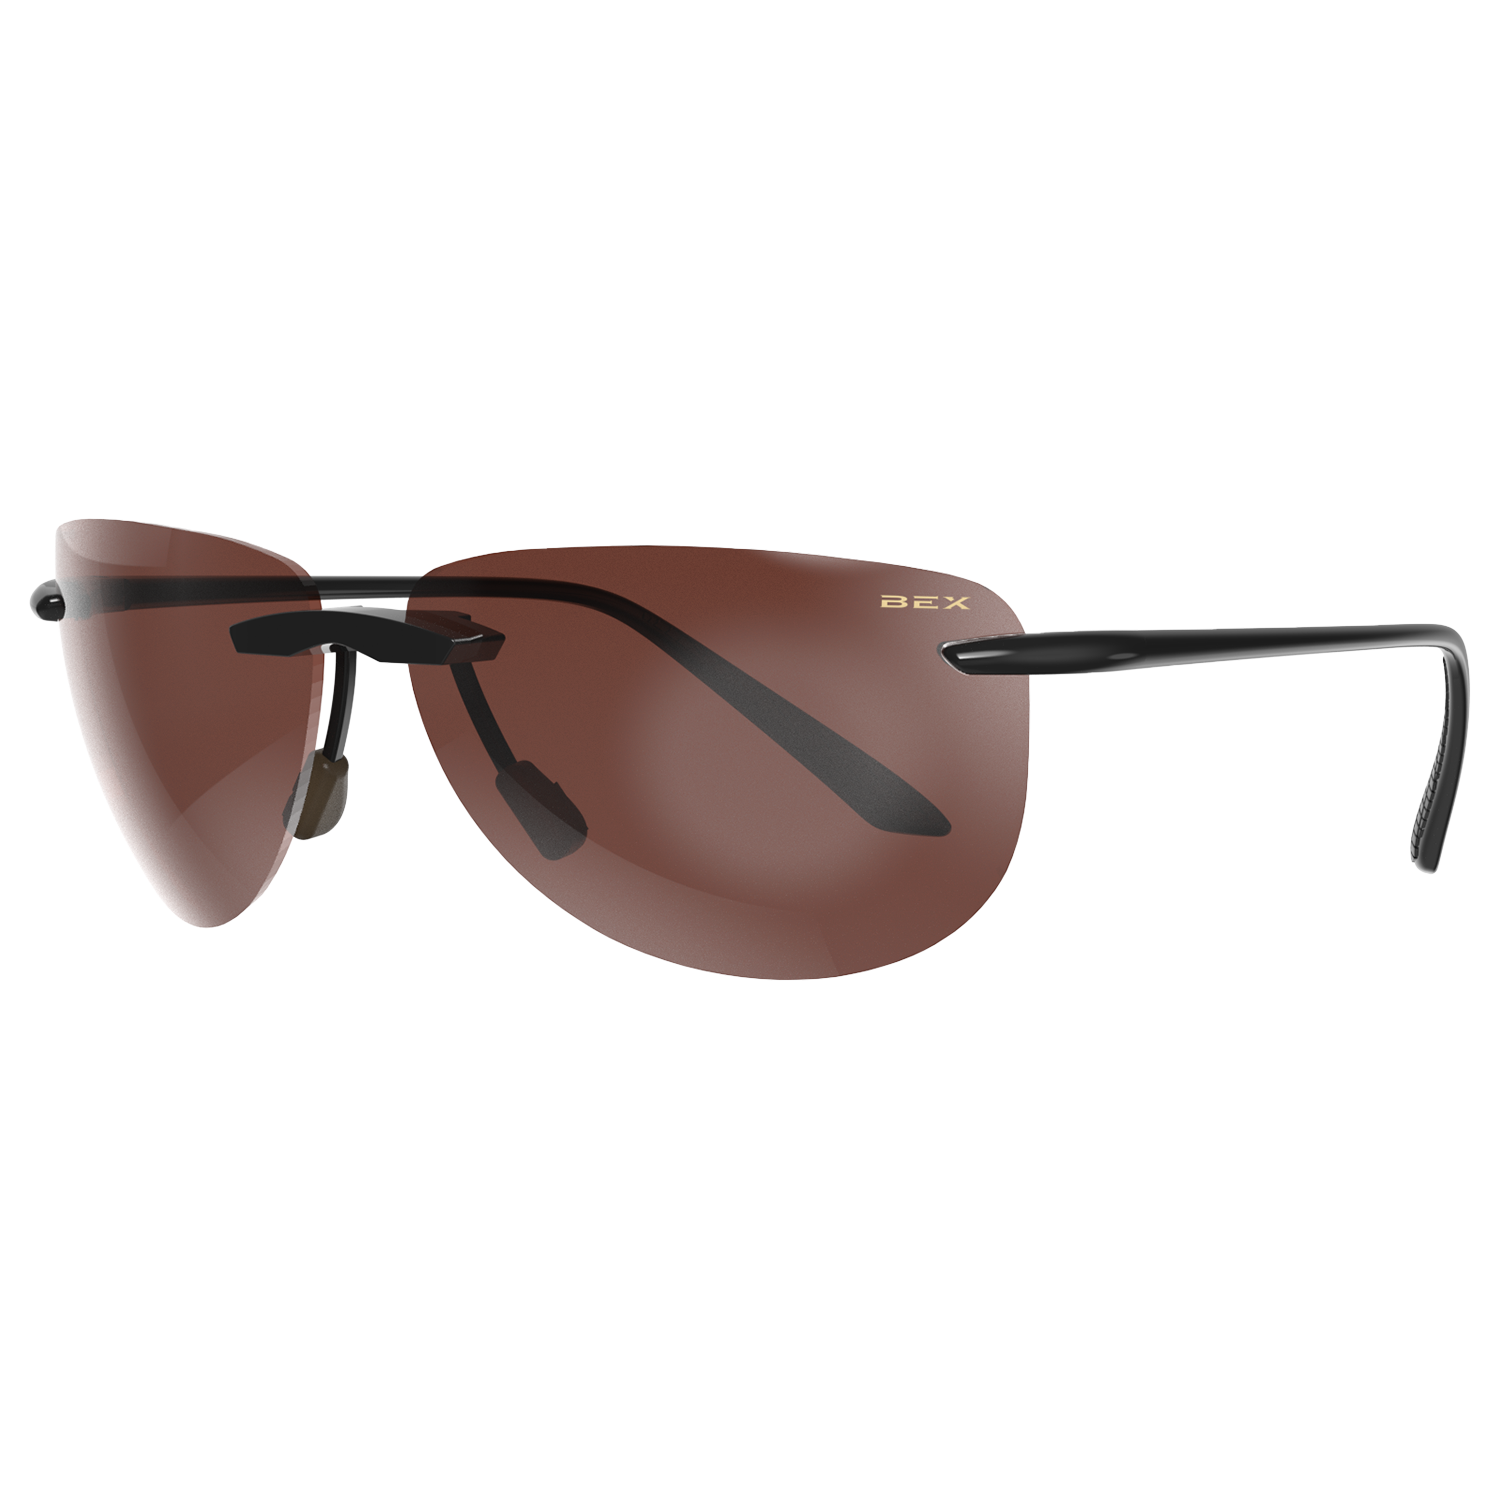 Black Thick Acetate Square Tinted Sunglasses with Brown Sunwear Lenses -  007 | Tinted sunglasses, Sunglasses, Horn-rimmed